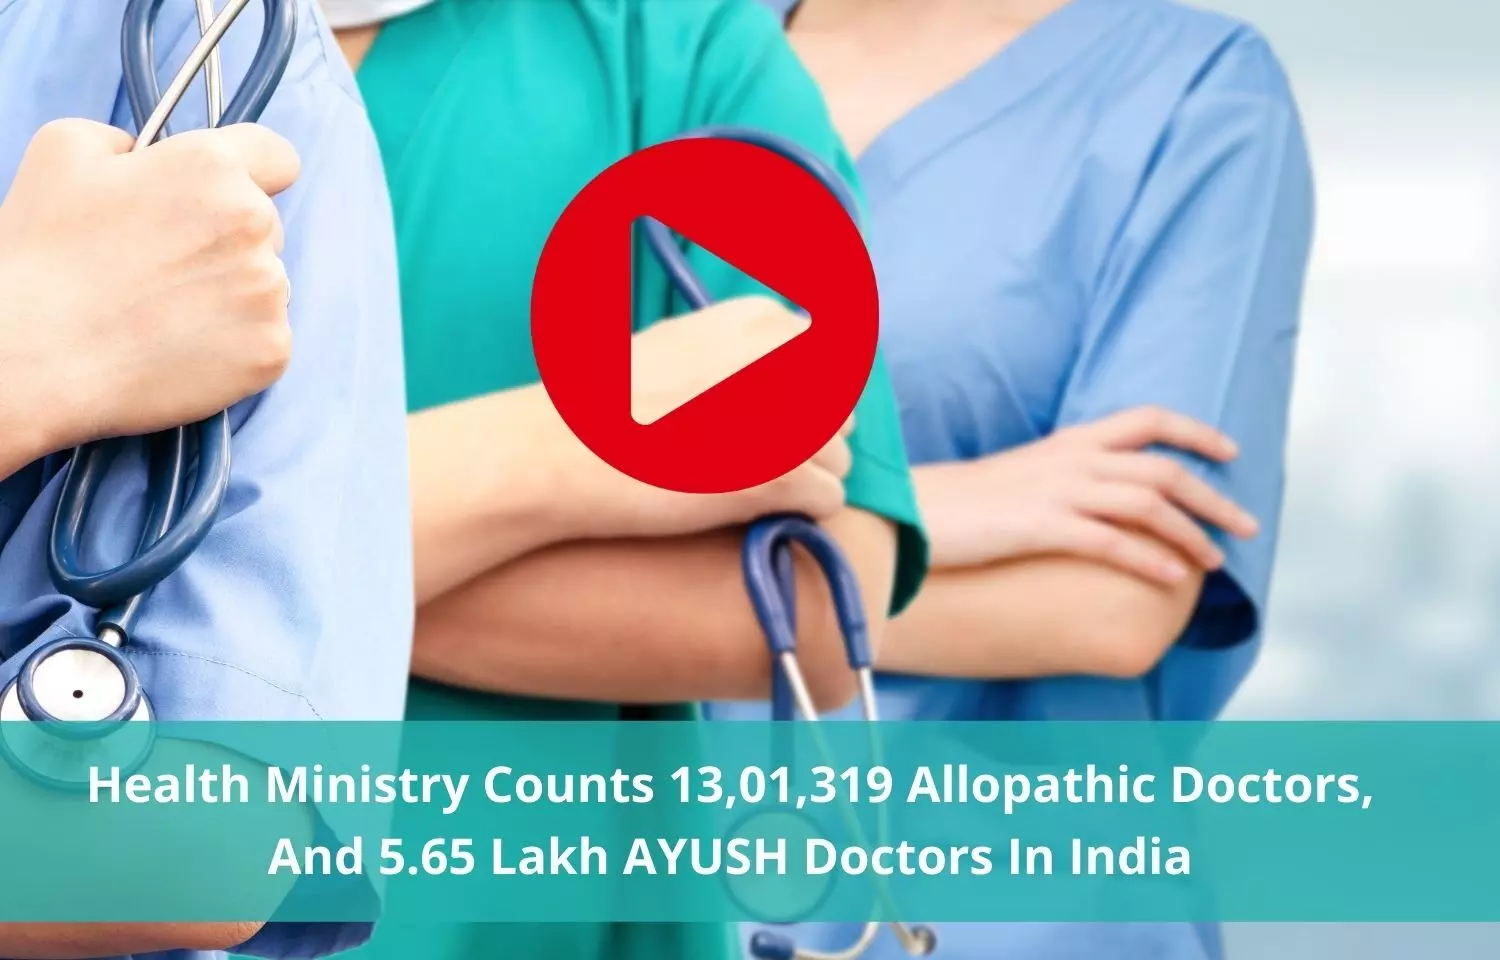 Health Ministry counts 5.65 Lakh AYUSH doctors, and 13,01,319 allopathic doctors in India